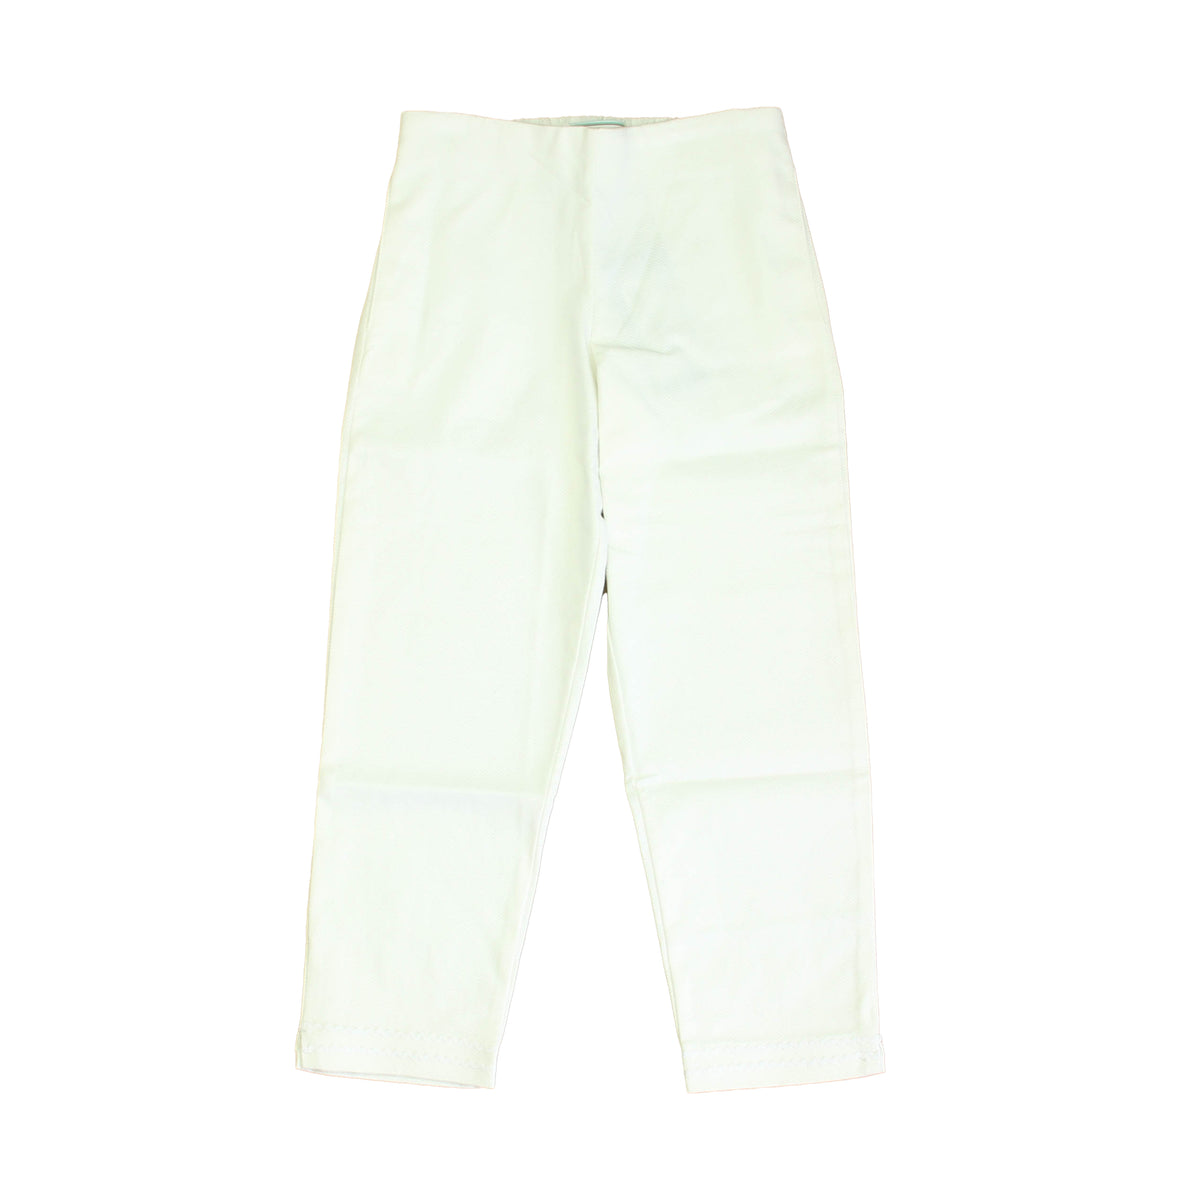 New with Tags: White Pants -- FINAL SALE